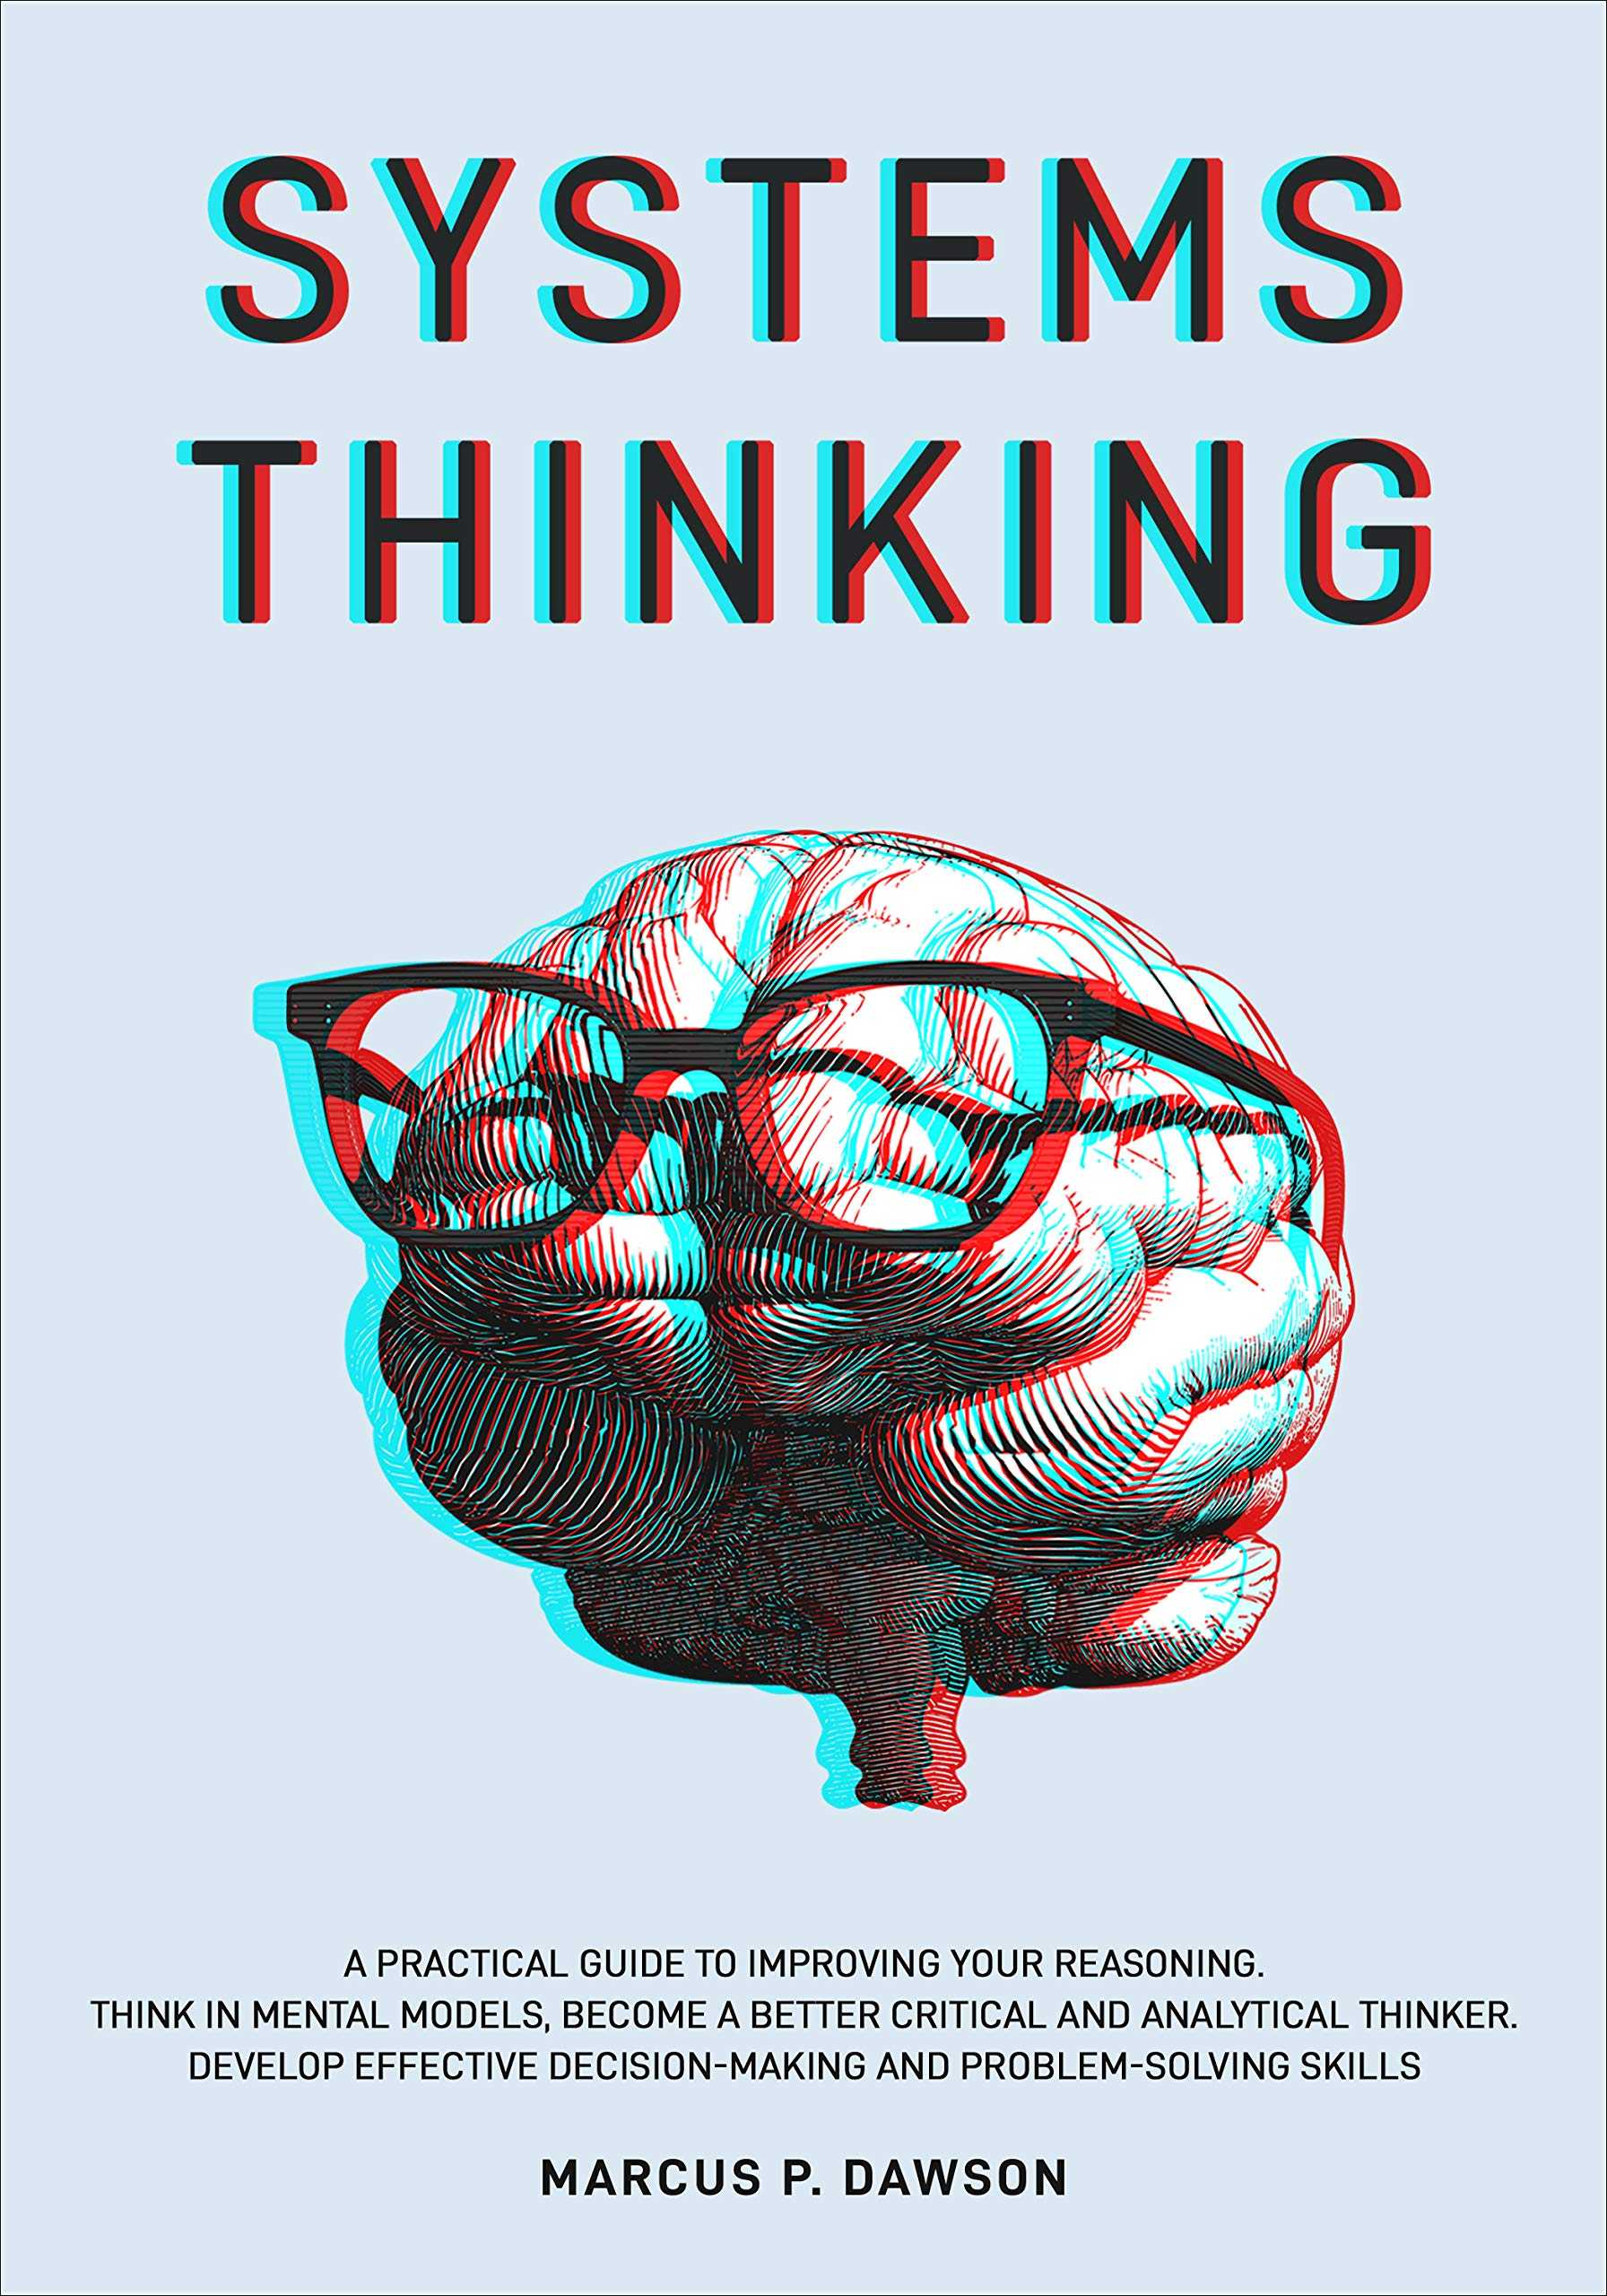 Systems Thinking: A Practical Guide to Improving Your Reasoning. Think in Mental Models, Become a Better Critical and Analytical Thinker. Develop Effective Decision-Making and Problem-Solving Skills